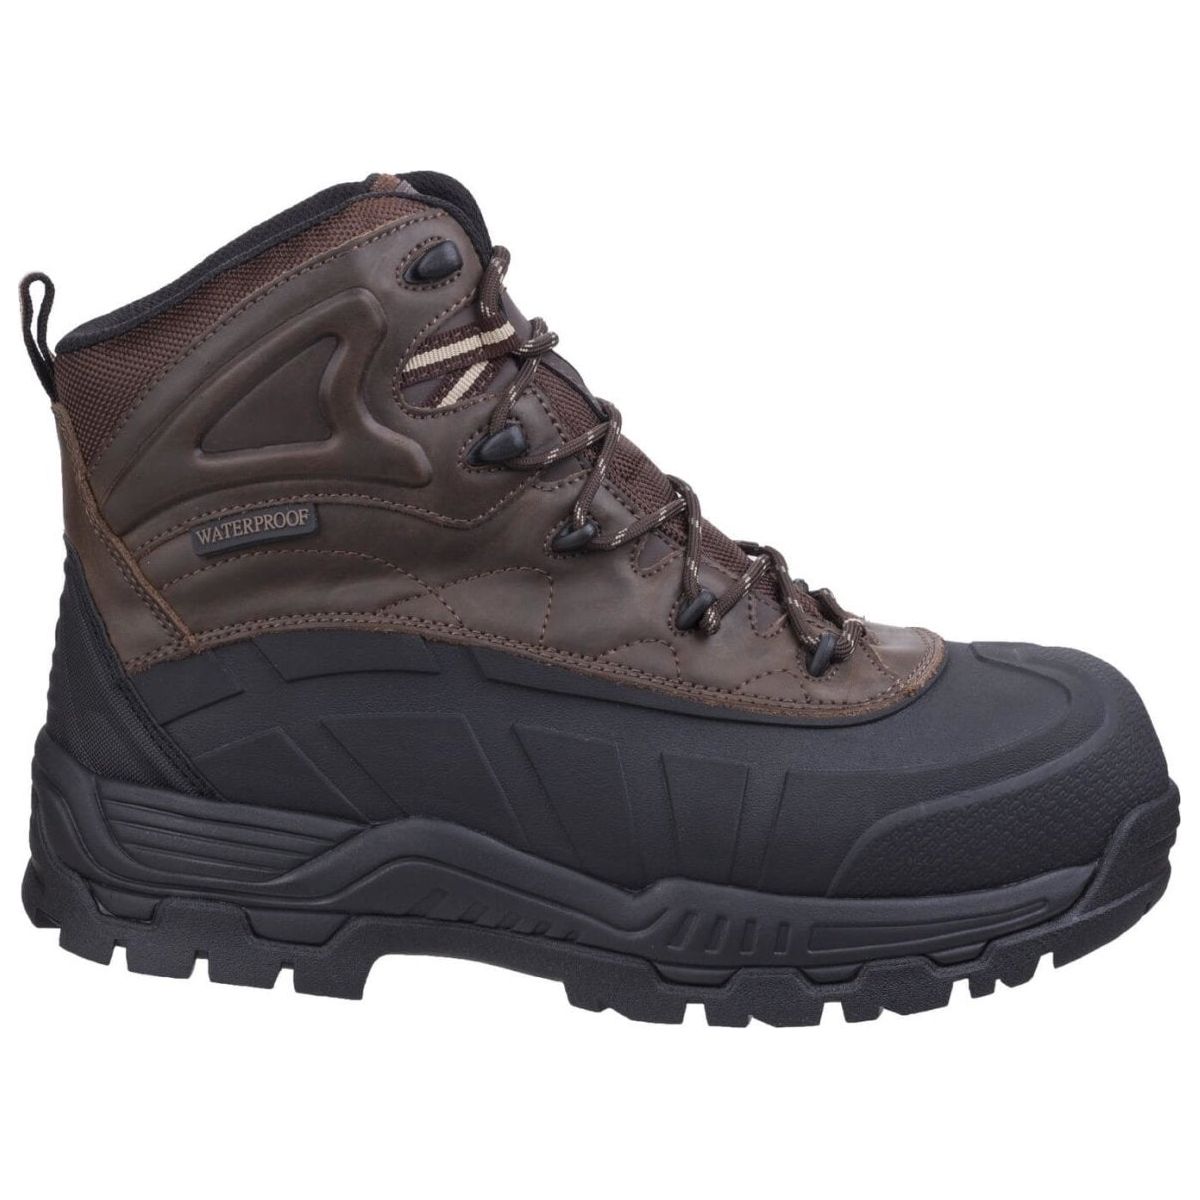 Amblers Fs430 Orca Safety Boots Womens - workweargurus.com